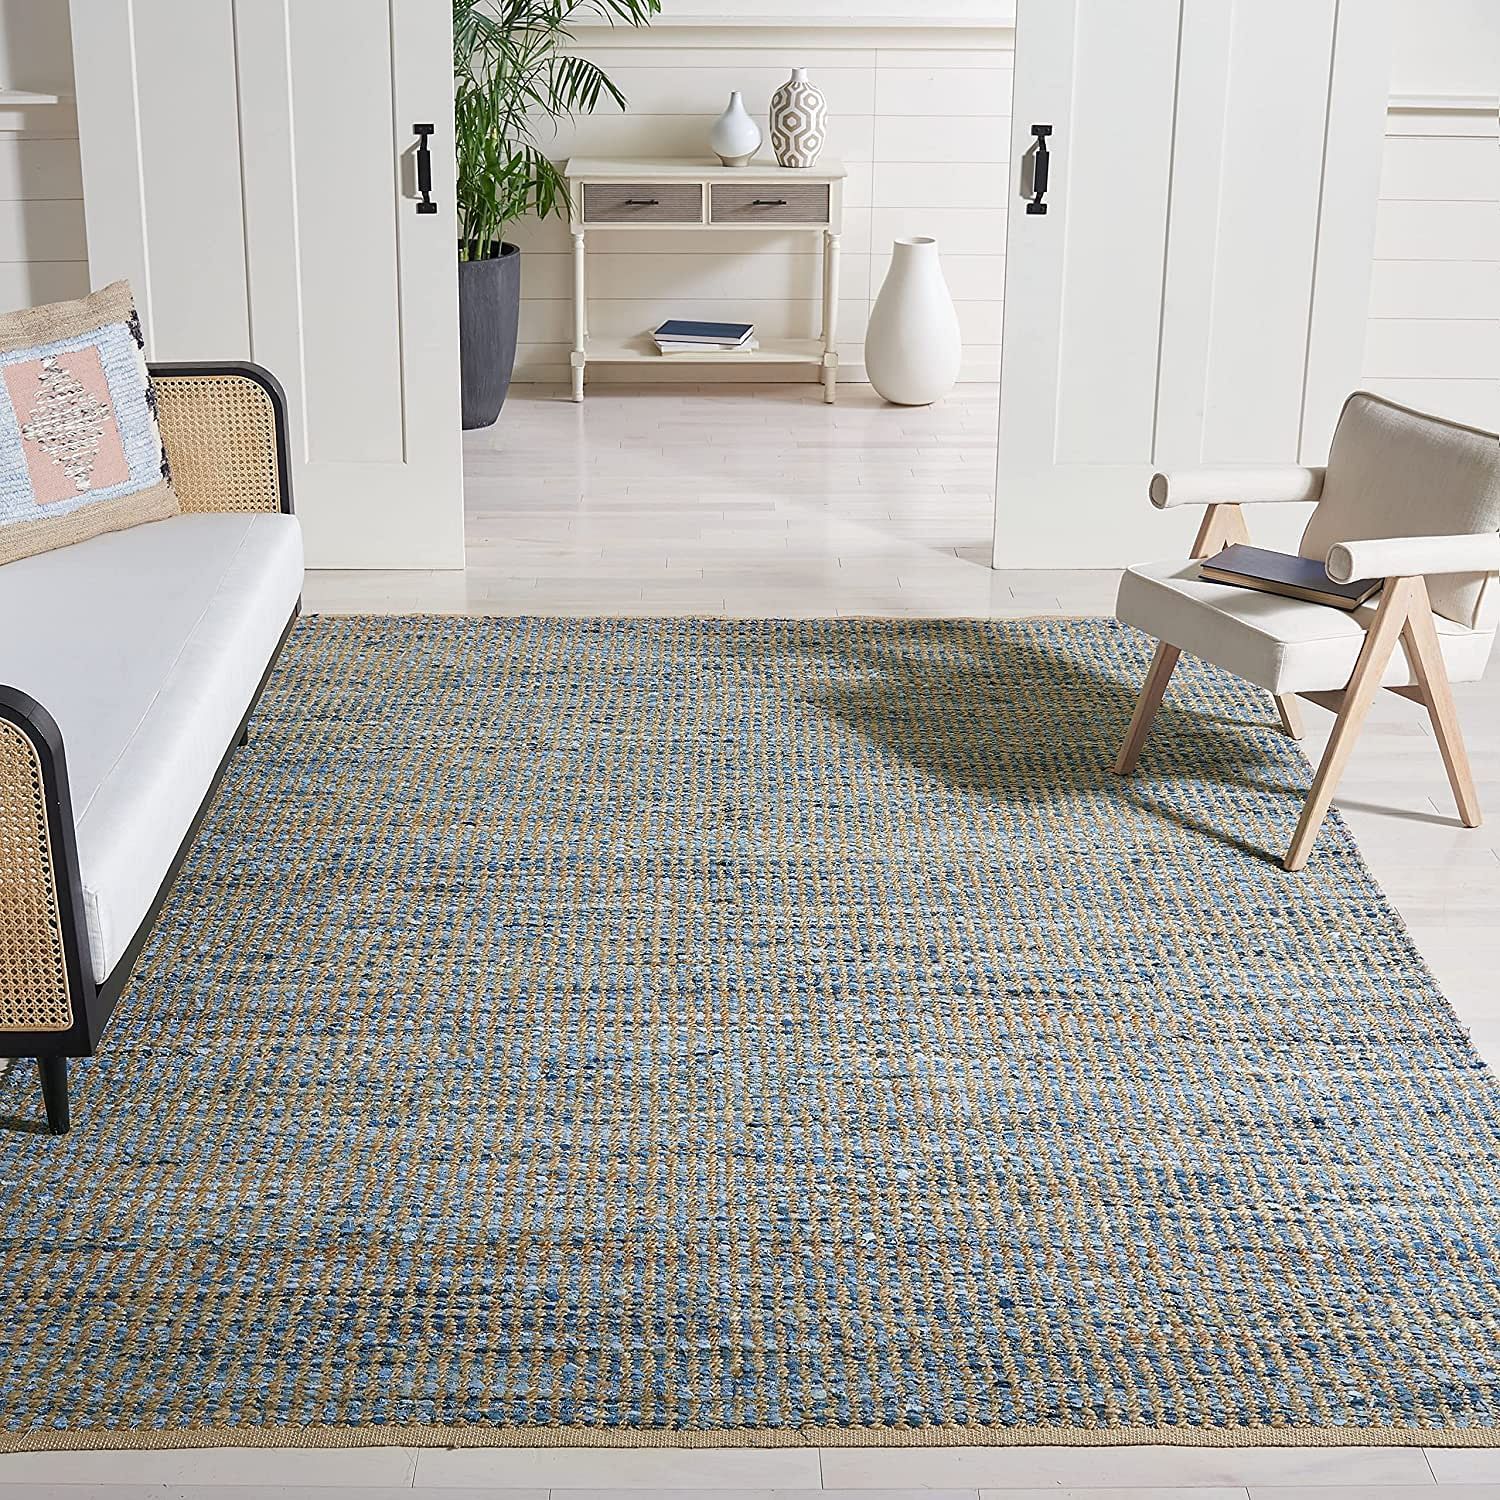 Buy Safavieh Cape Cod Collection Cap352a Handmade Flatweave Coastal Braided  Jute Area Rug, 8' X 8' Square, Natural Blue Online At Lowest Price In Ubuy  India. B0792mhxgq Within Coastal Square Rugs (Photo 4 of 15)